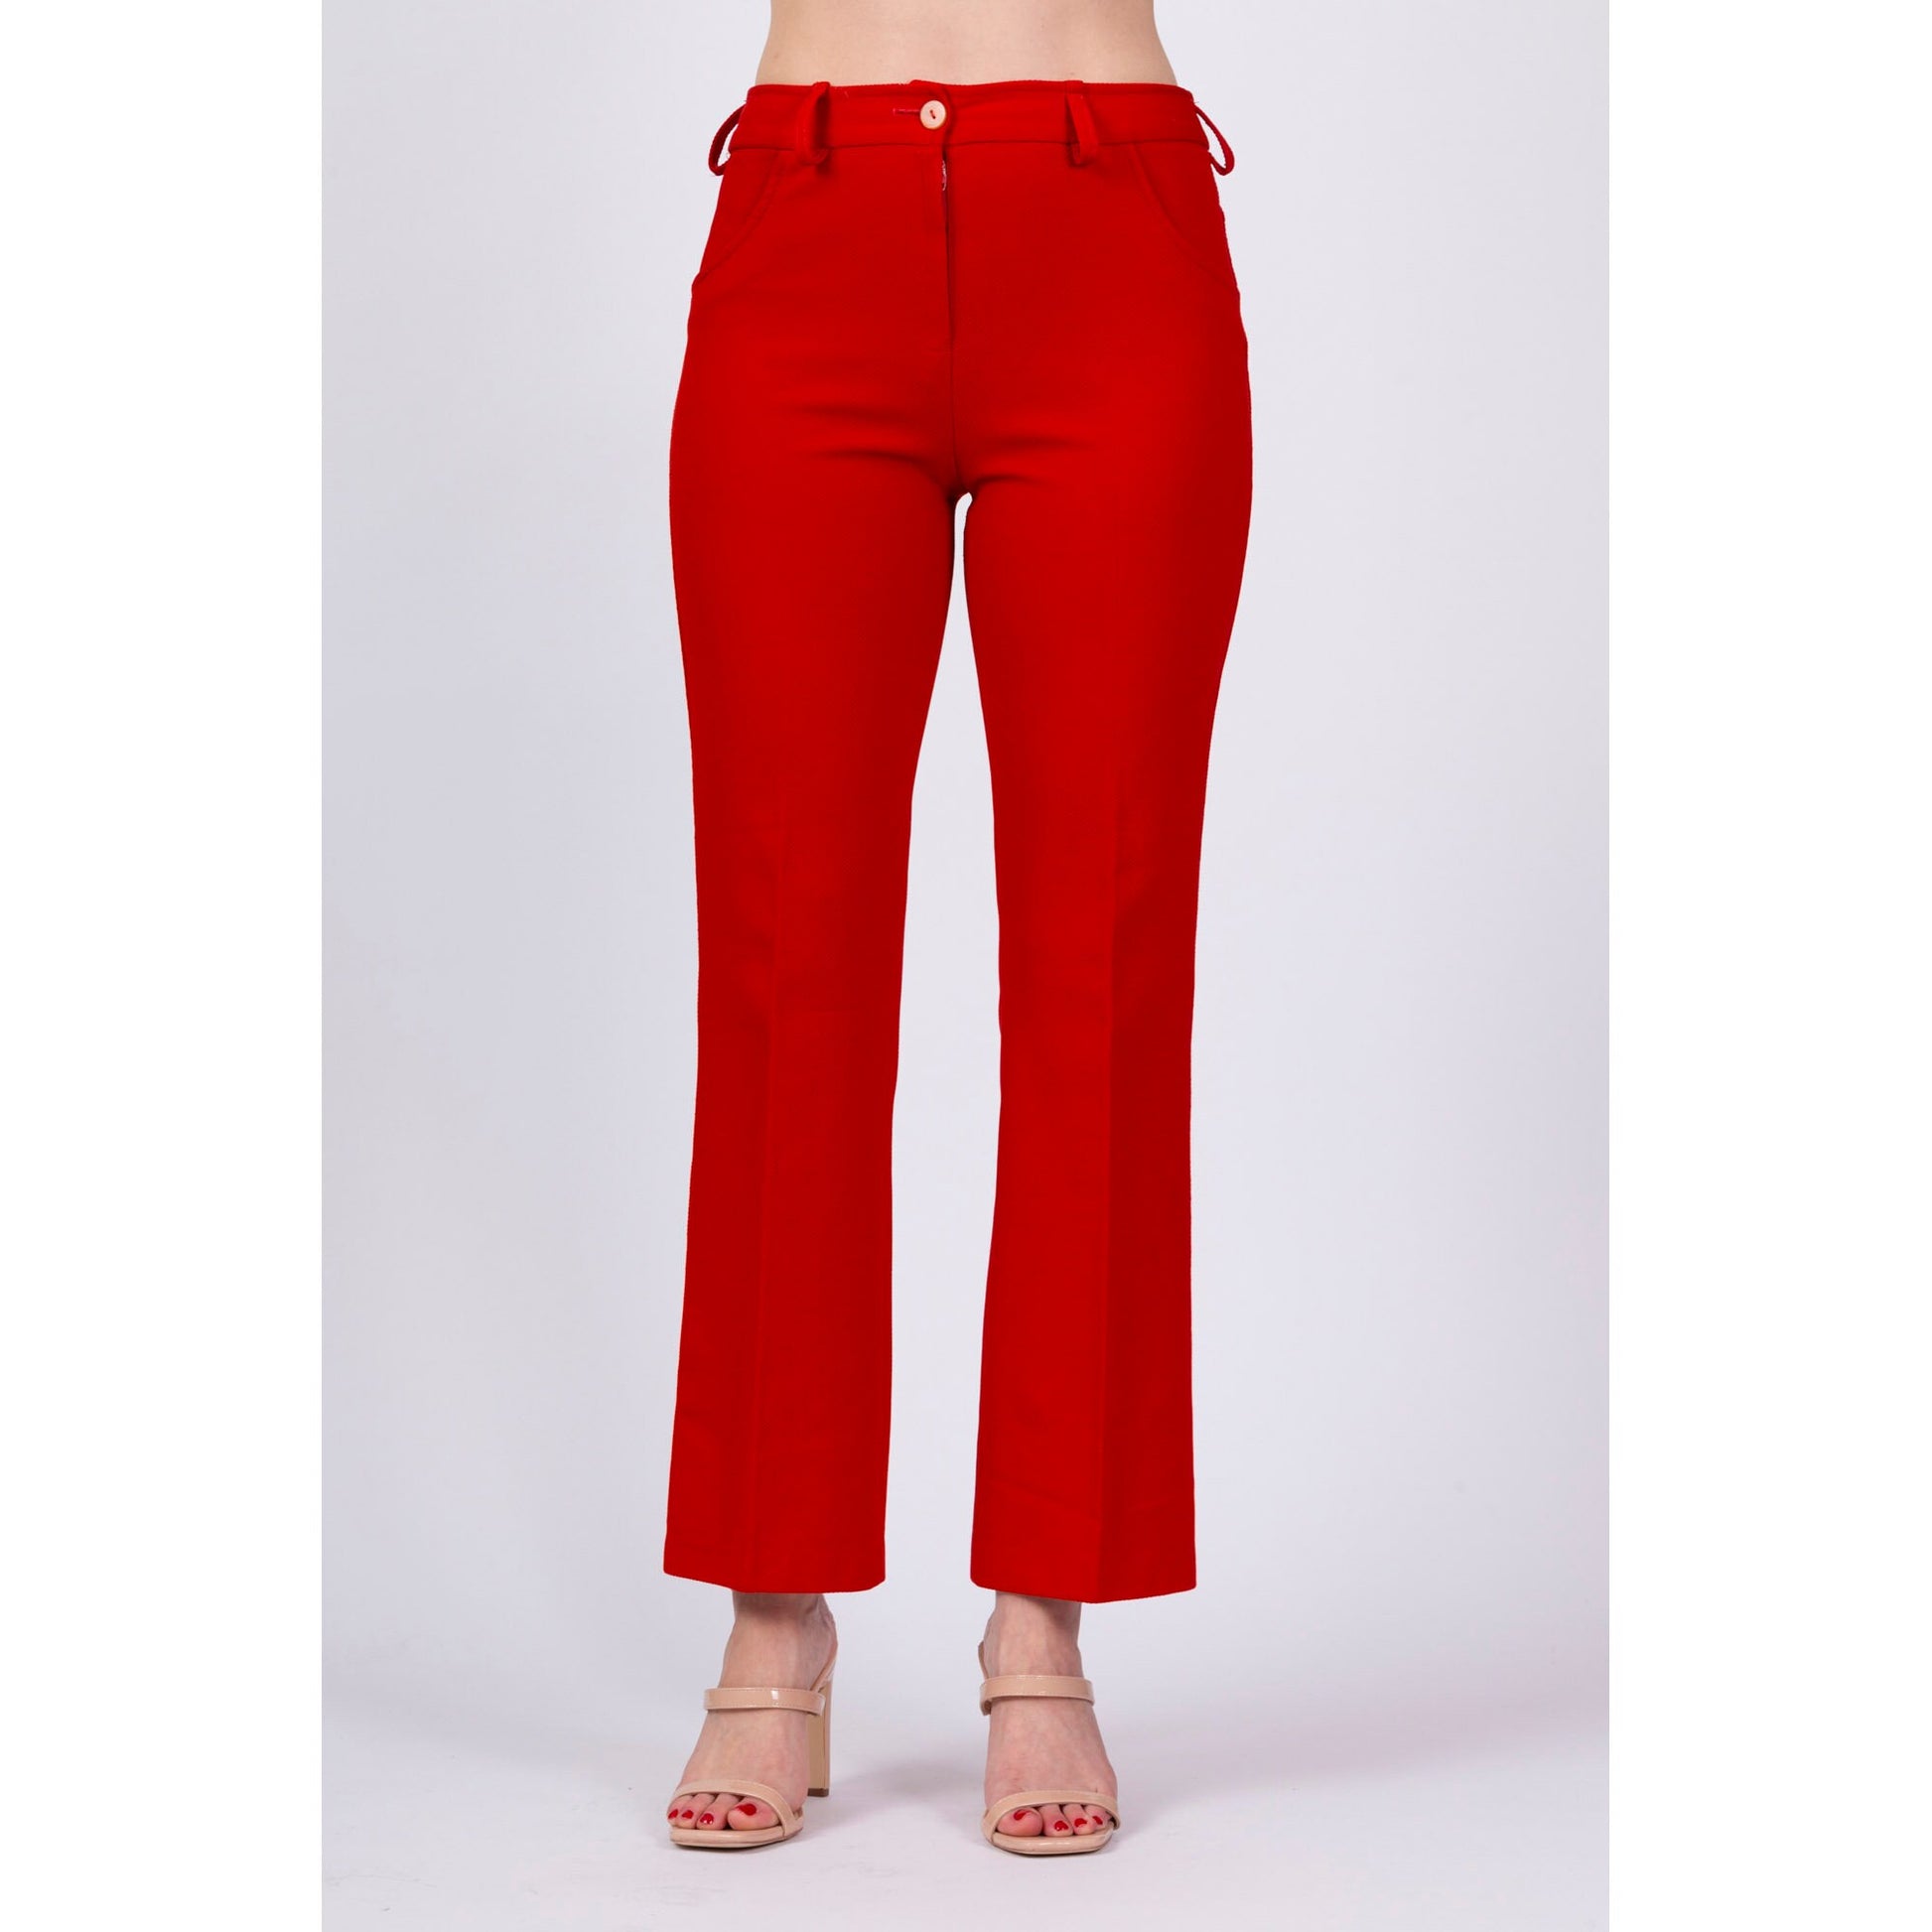 70s Red Mid-Rise Pants - Men's XS, Women's Small 